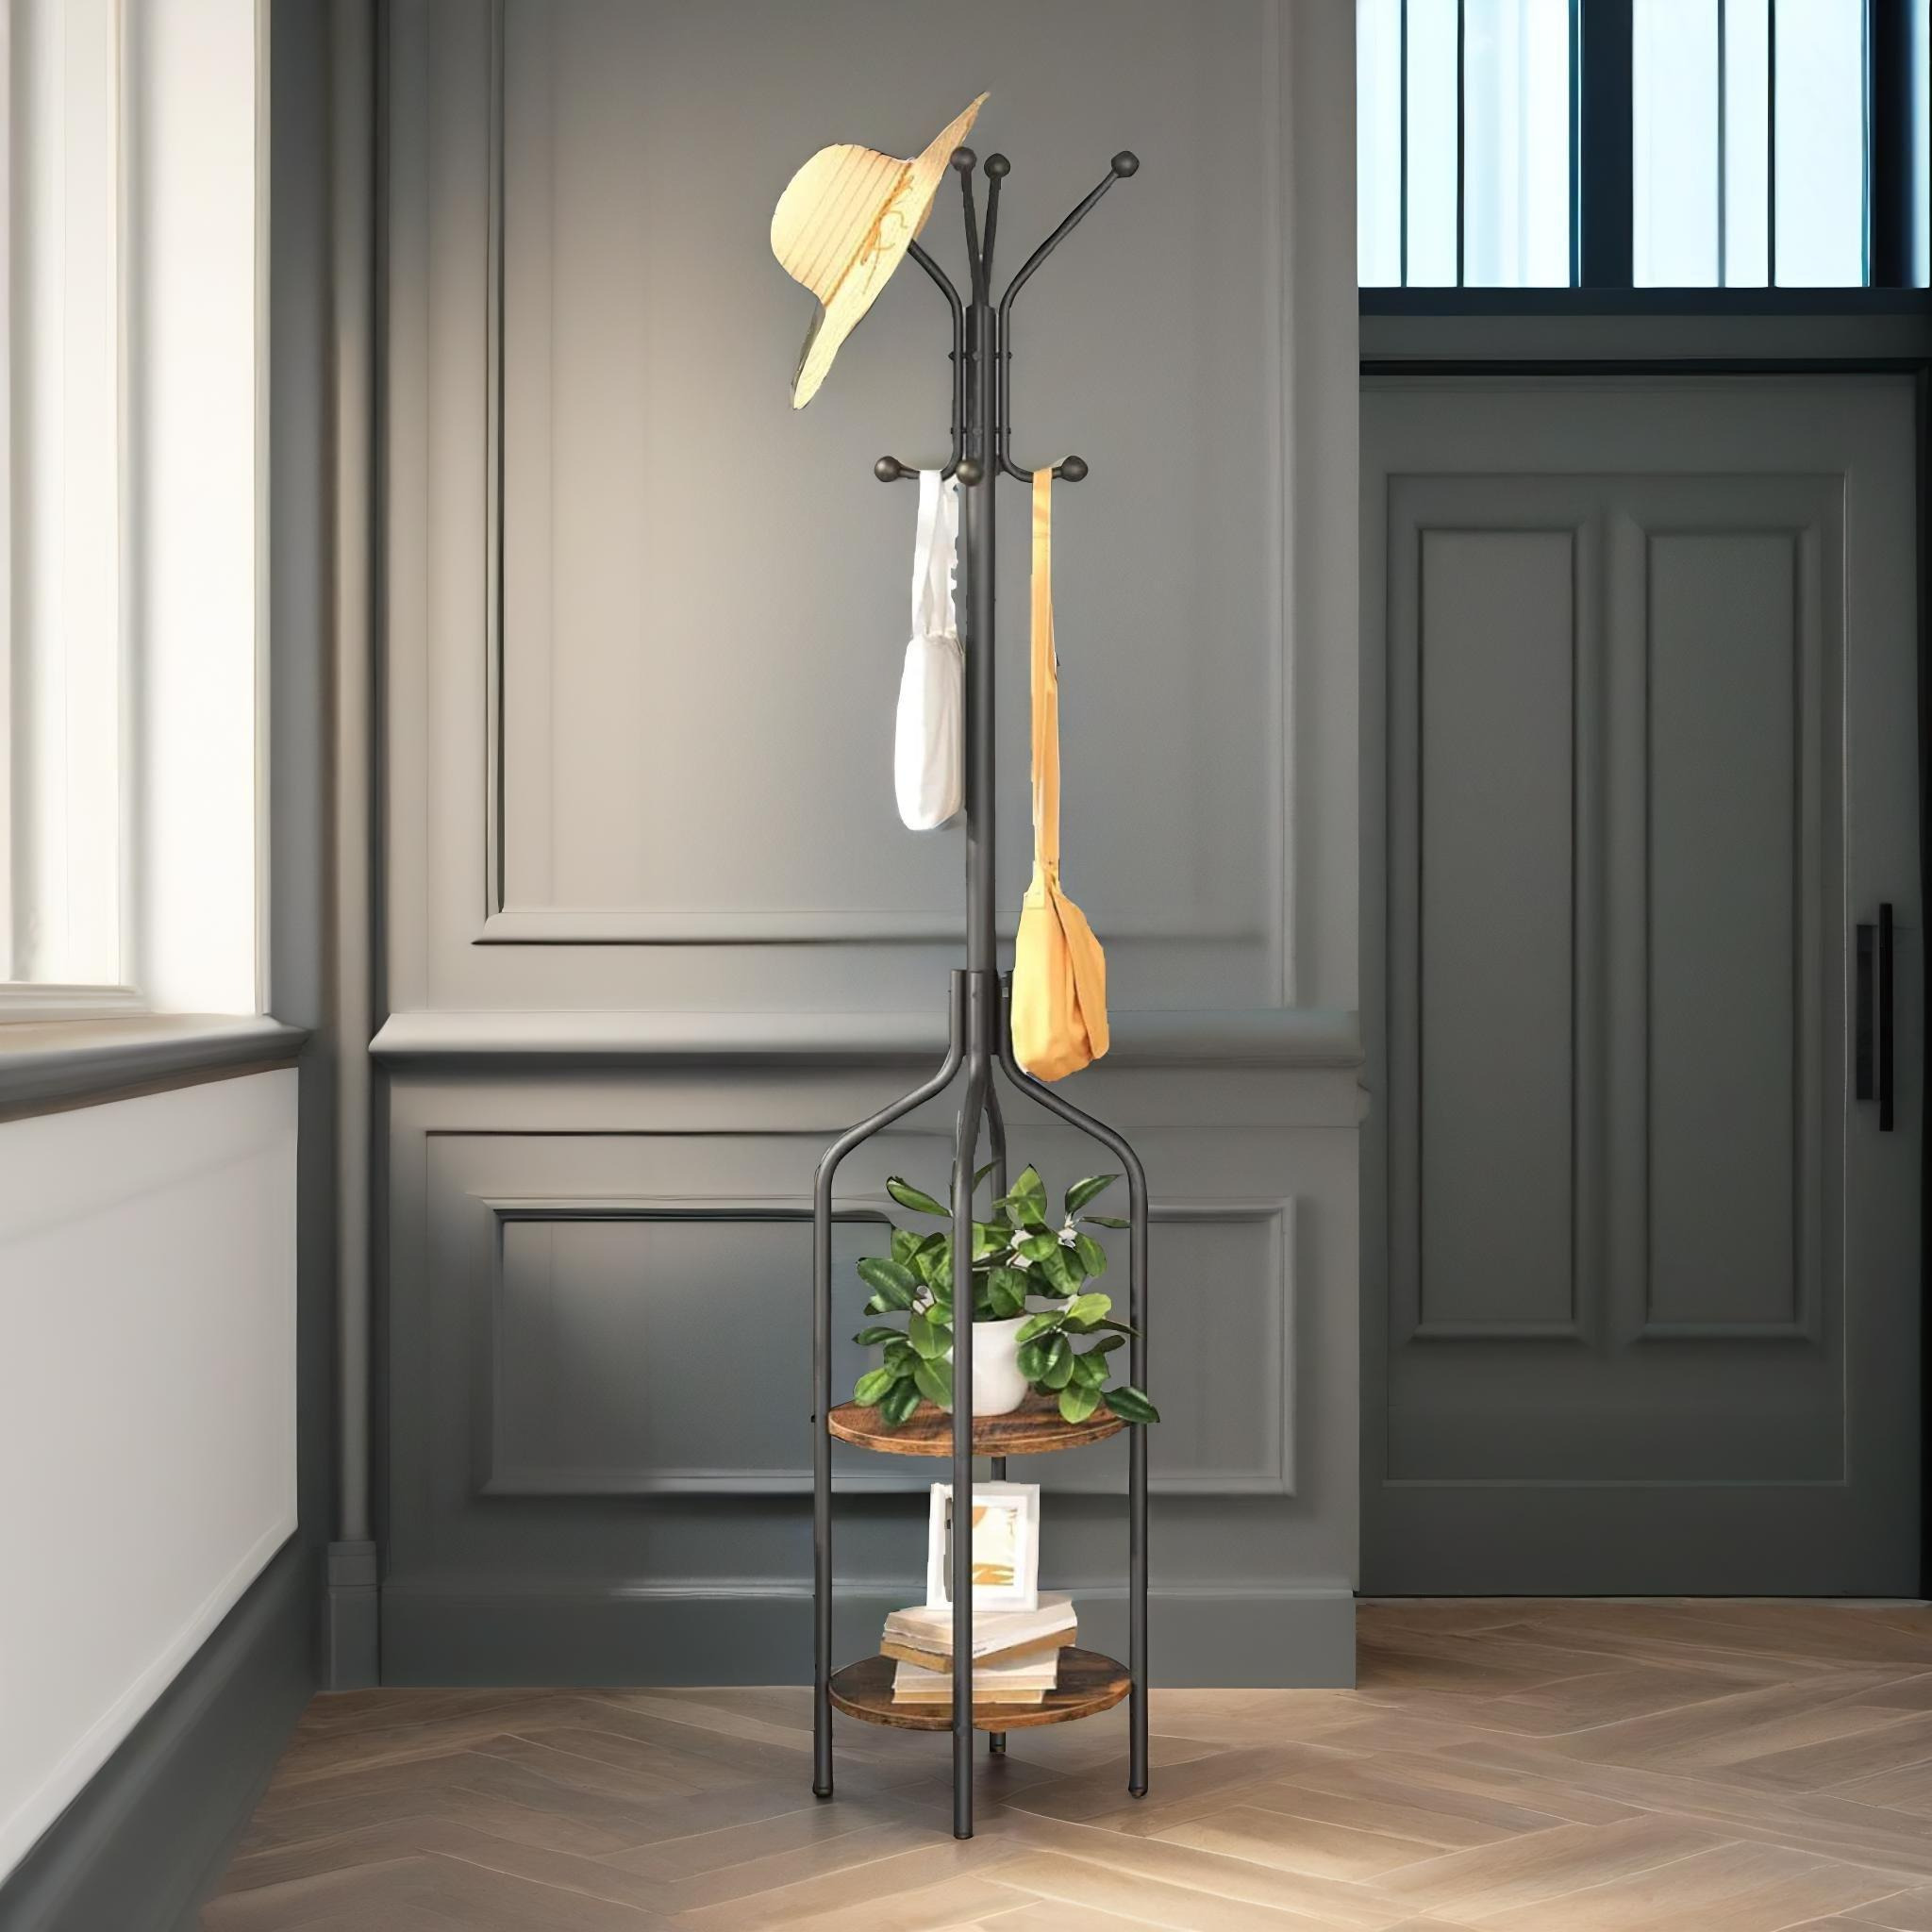 Coat Stand with 2 Shelves and 8 Hooks - image 1